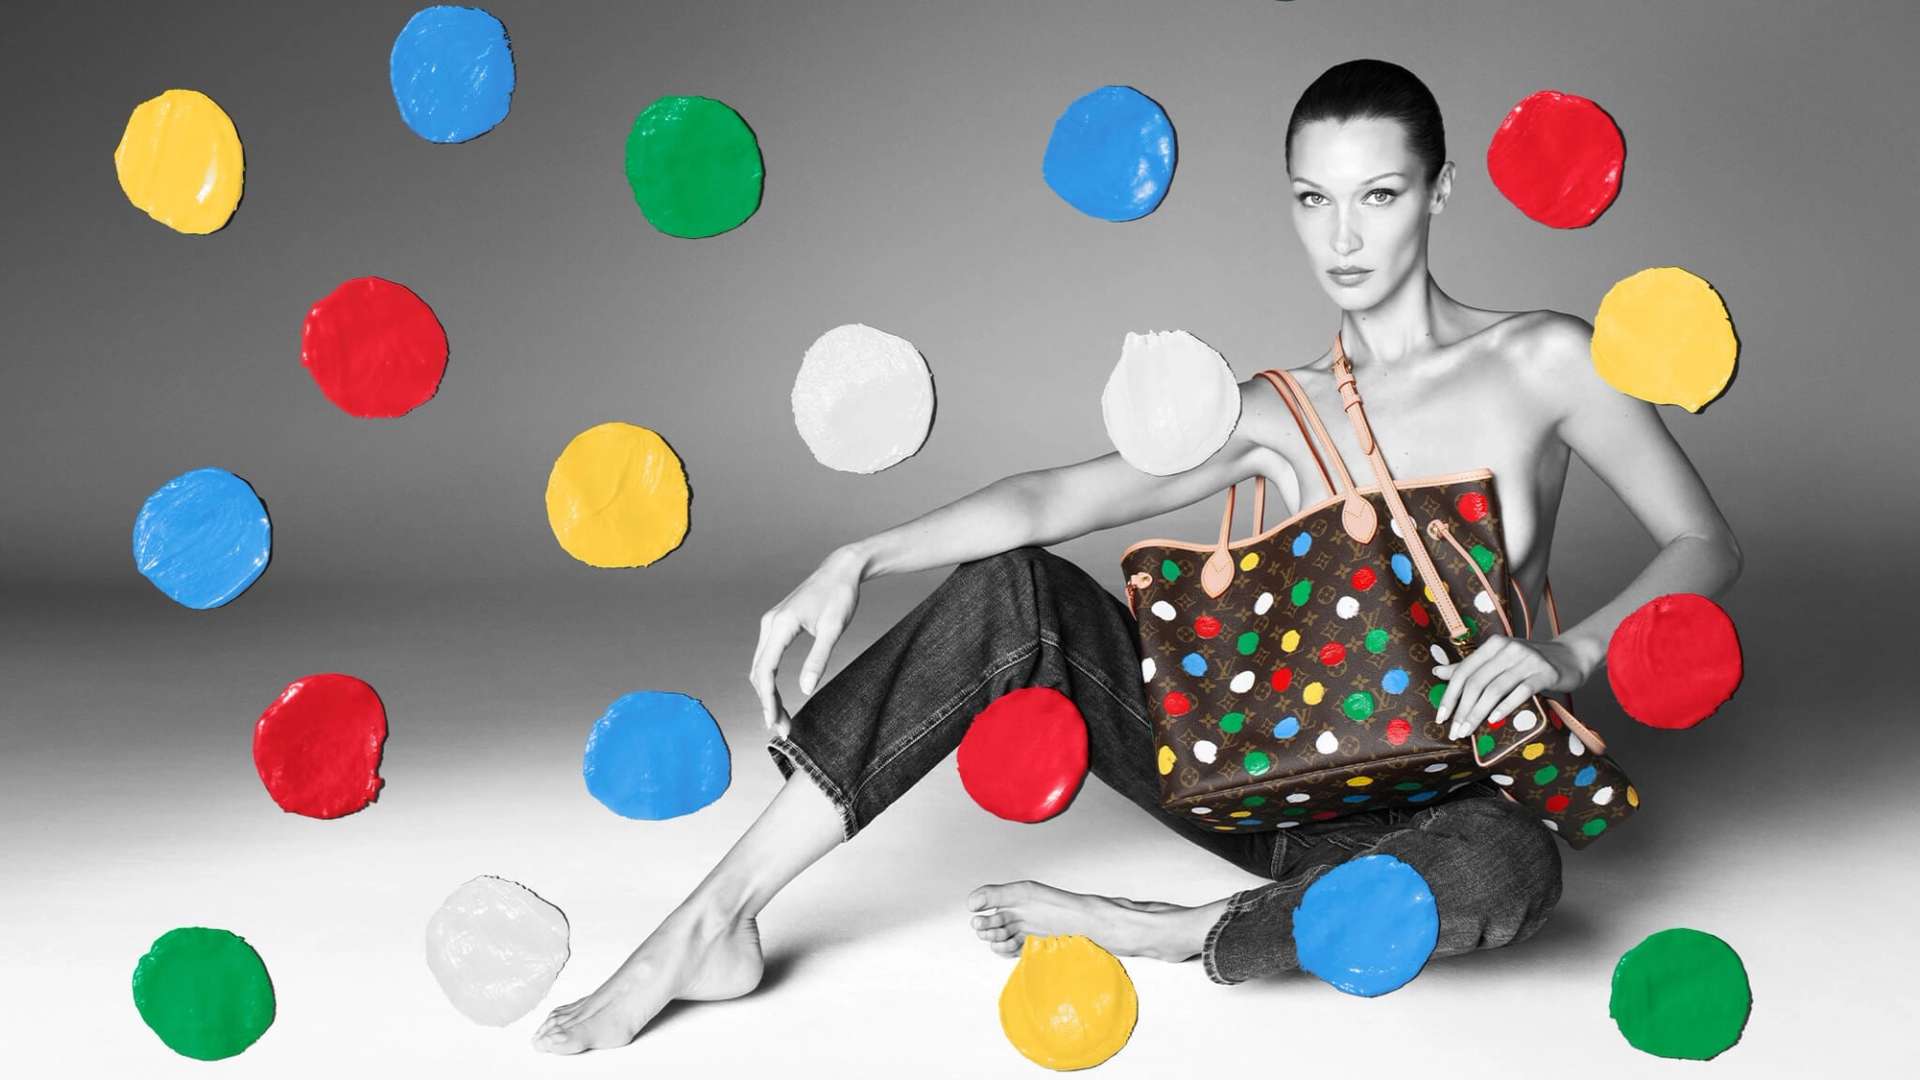 CREATING INFINITY: THE WORLDS OF LOUIS VUITTON AND YAYOI KUSAMA —   - Your favorite place to discover new artists